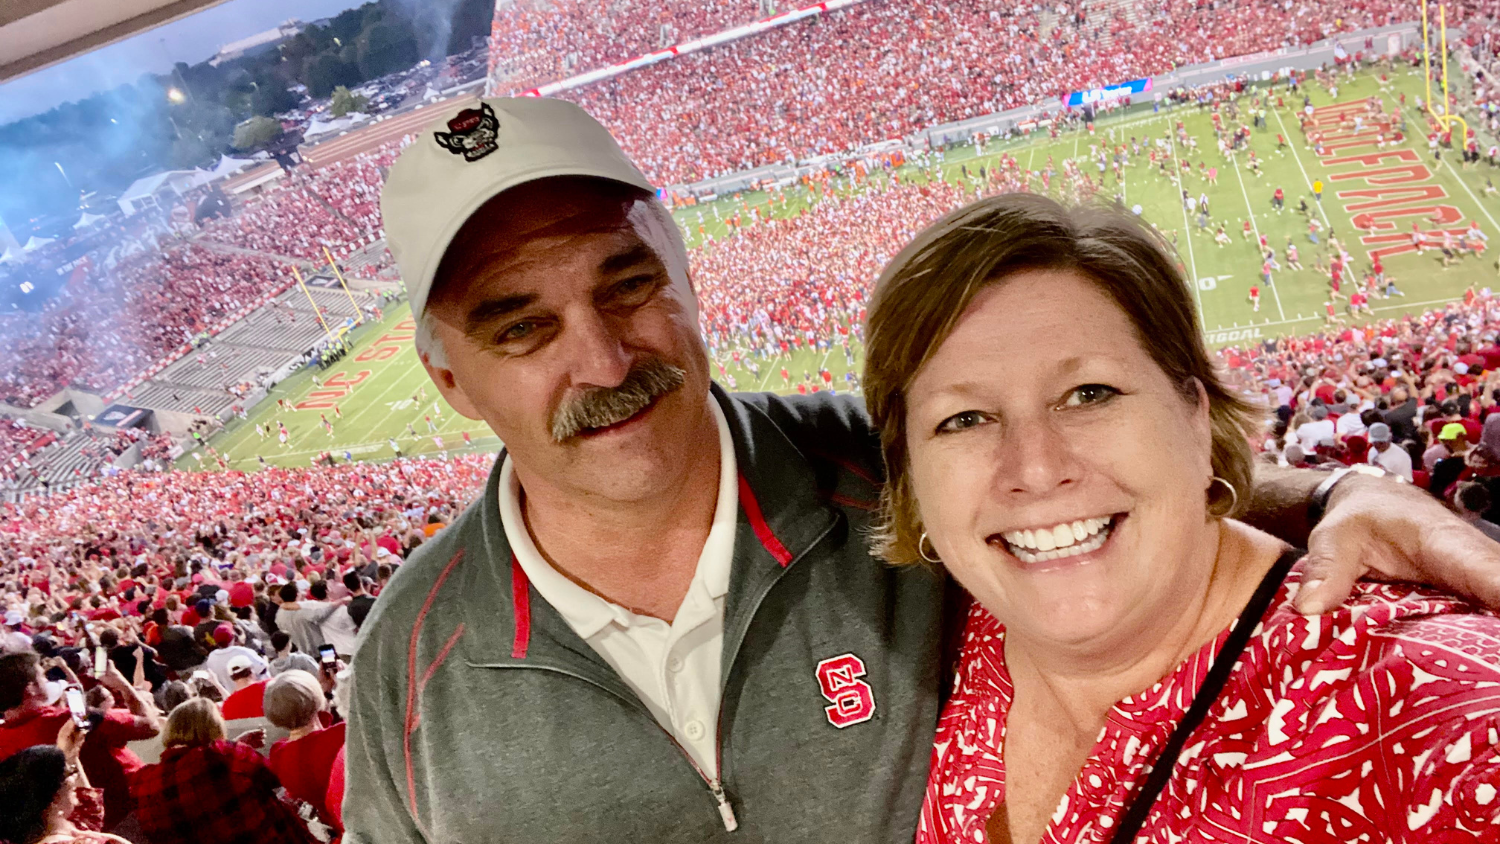 Bryan Blinson and his wife, at a NC State football game